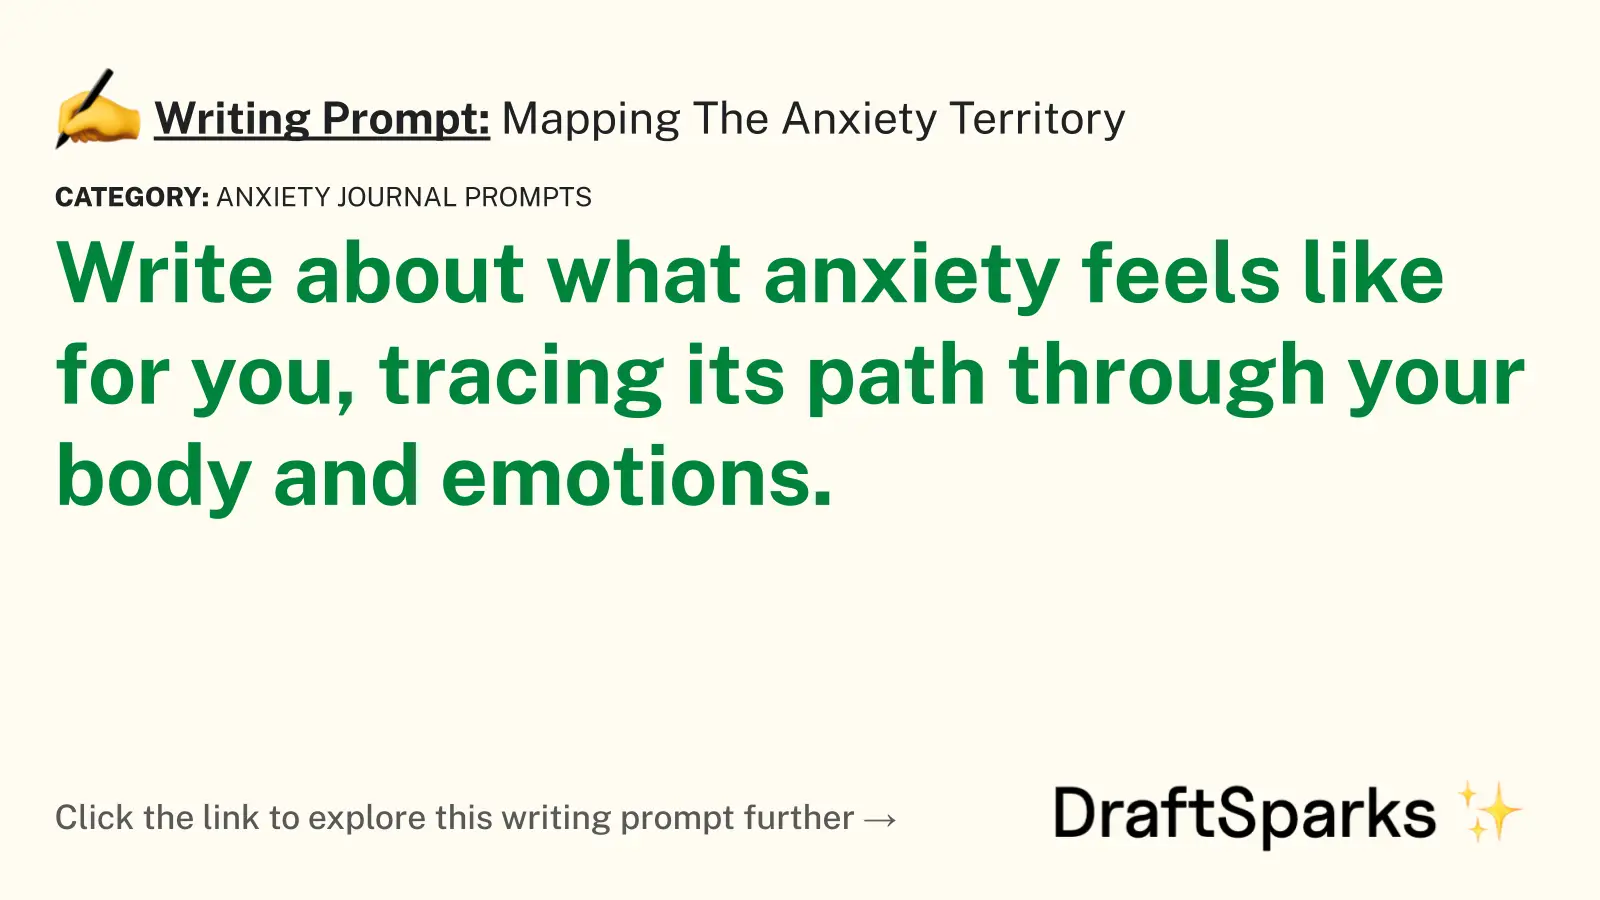 Mapping The Anxiety Territory